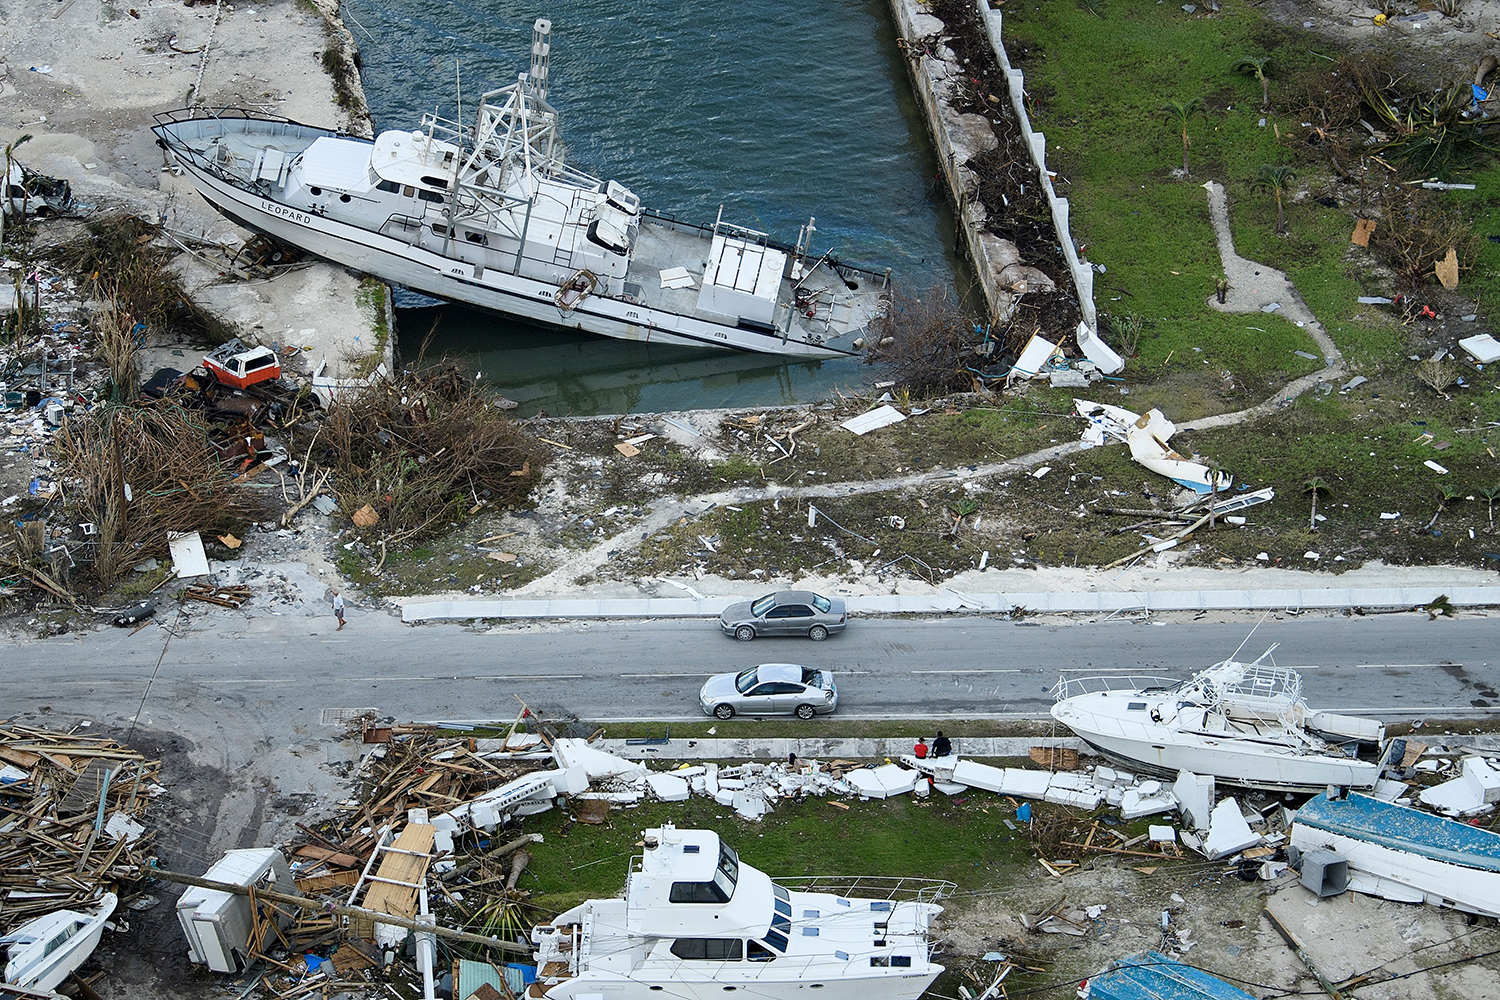 An aerial view of damage from Hurricane Dorian in the Bahamas